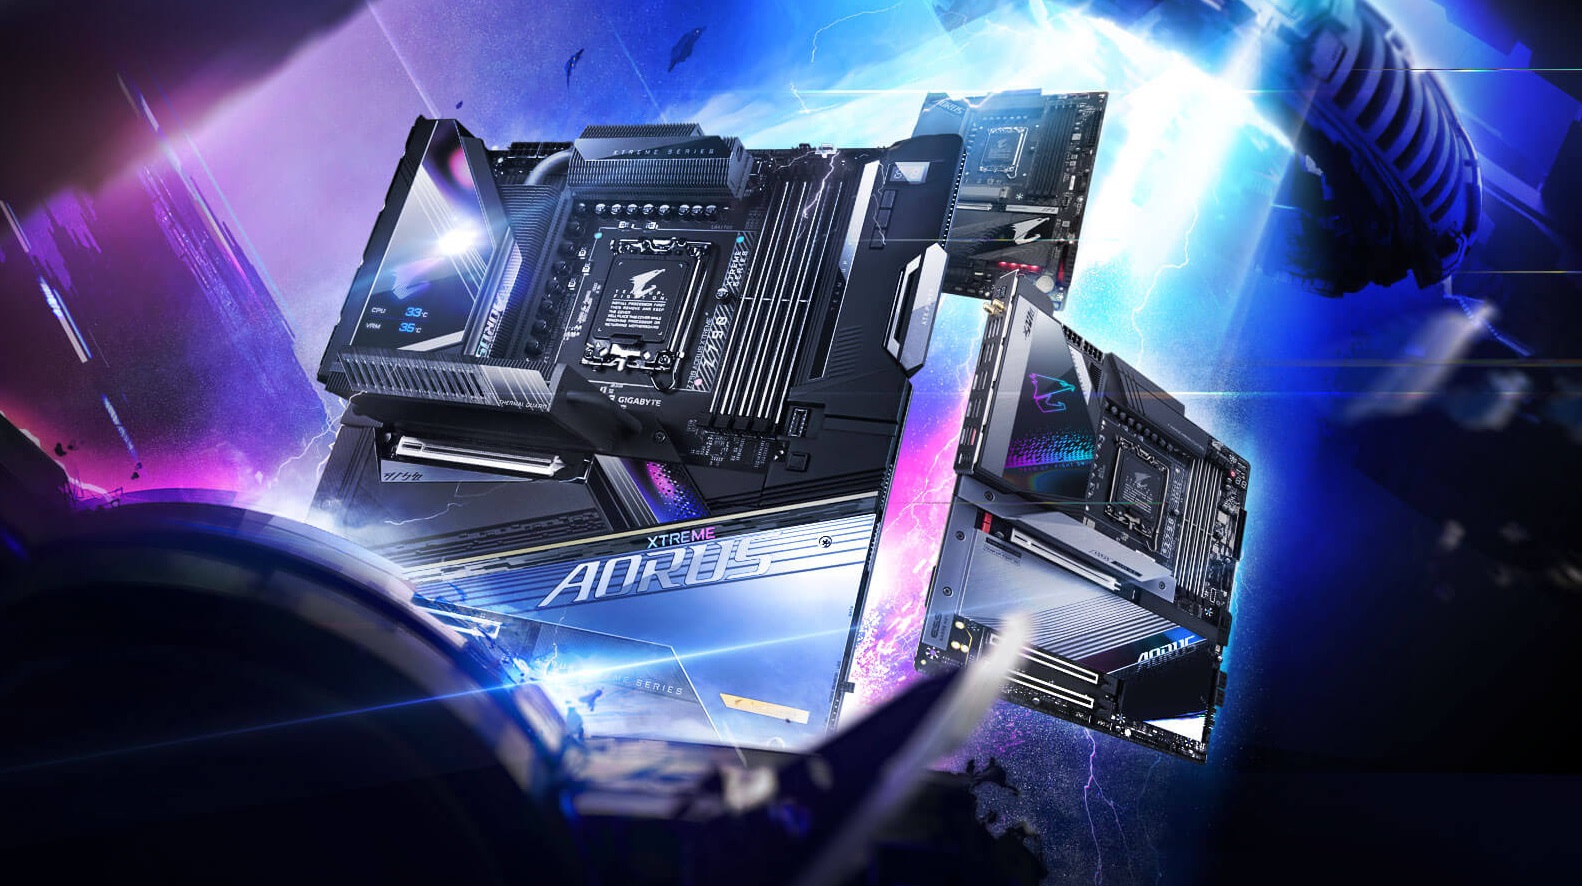 Gigabyte promises “Superior Stability” with Intel Baseline support on Z790/B760 motherboards